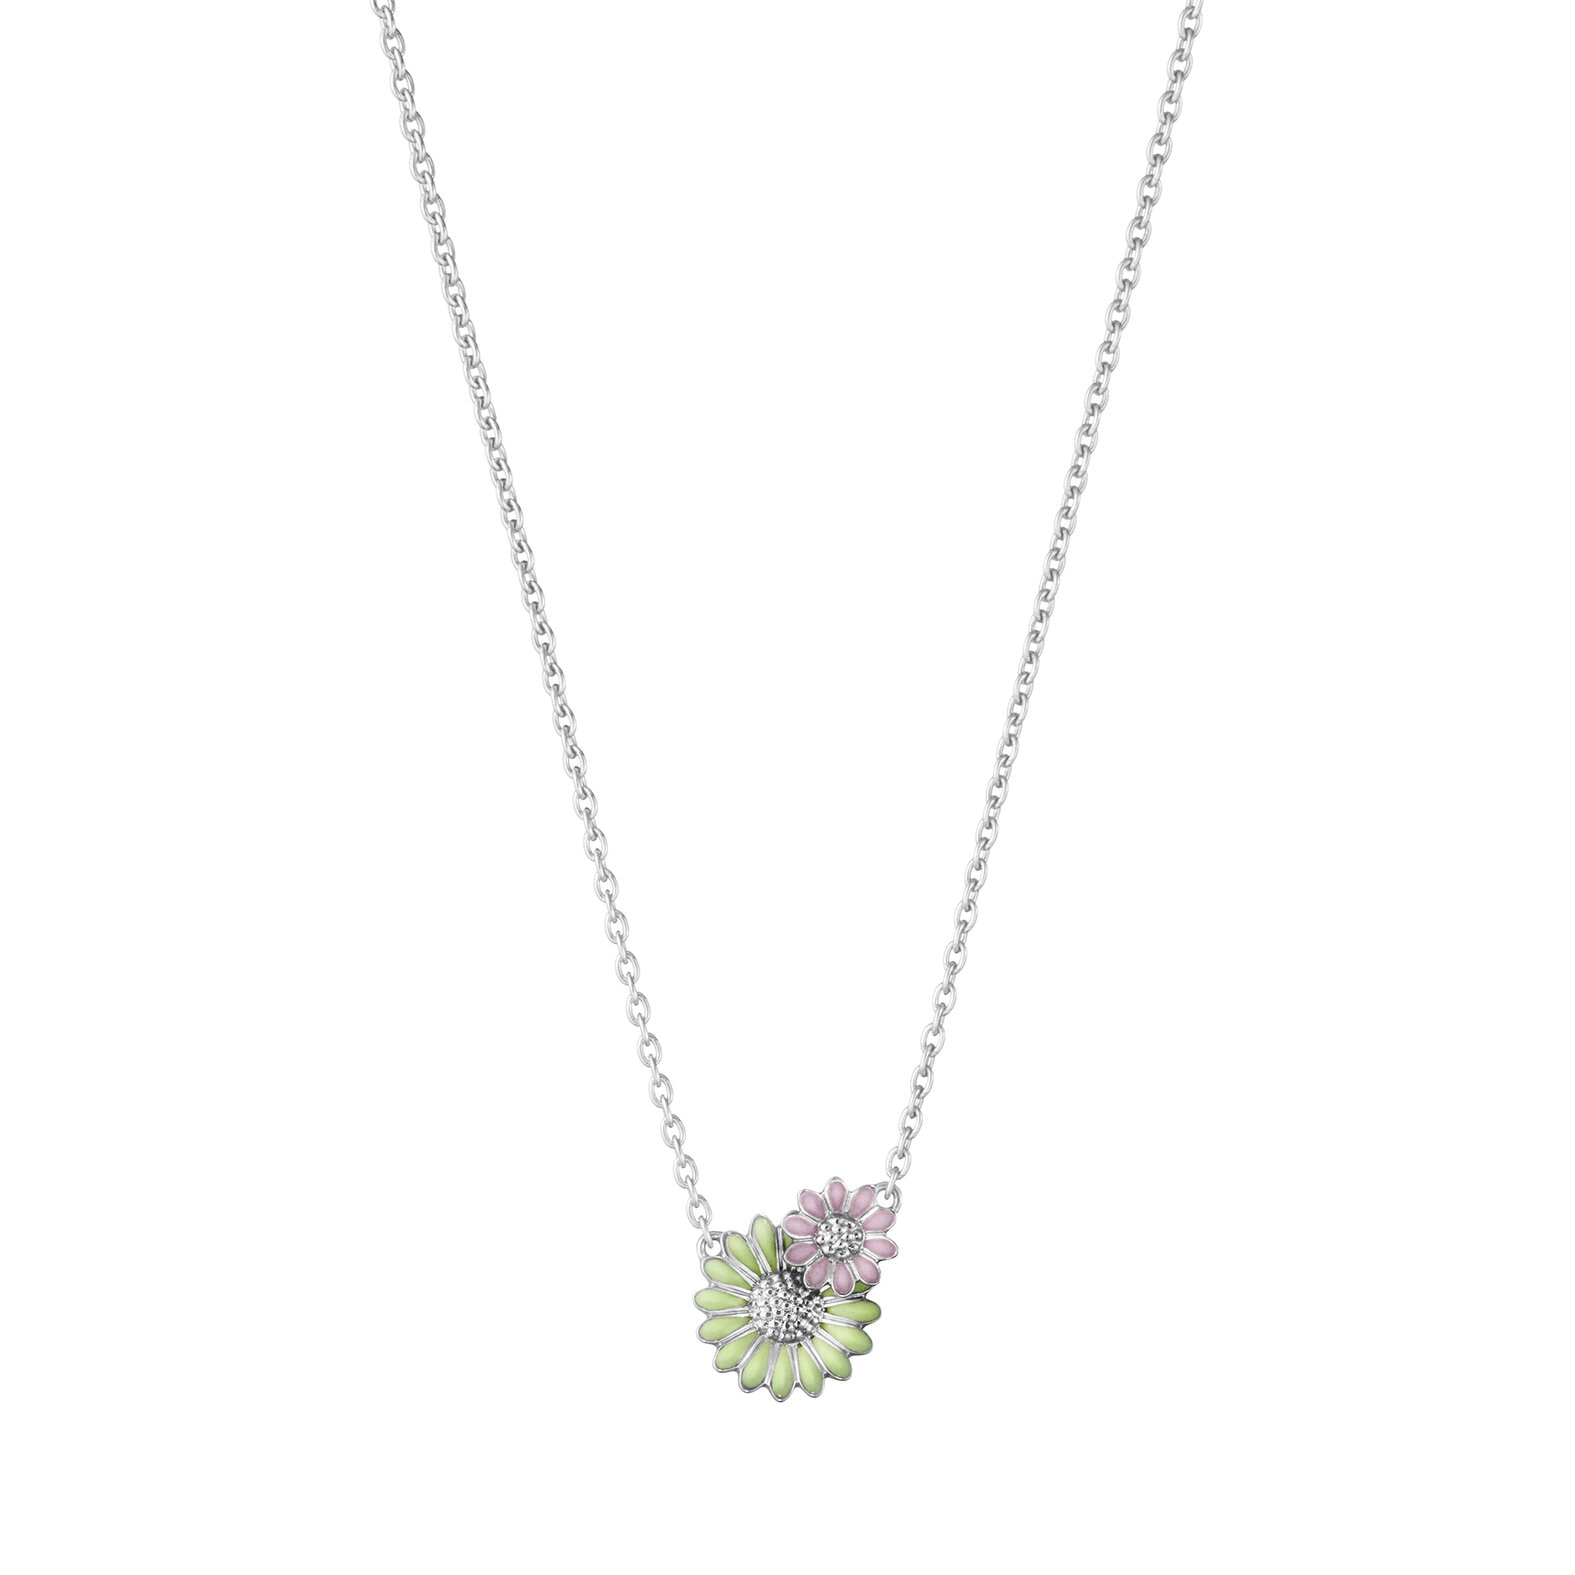 Daisy necklace (green/pink)